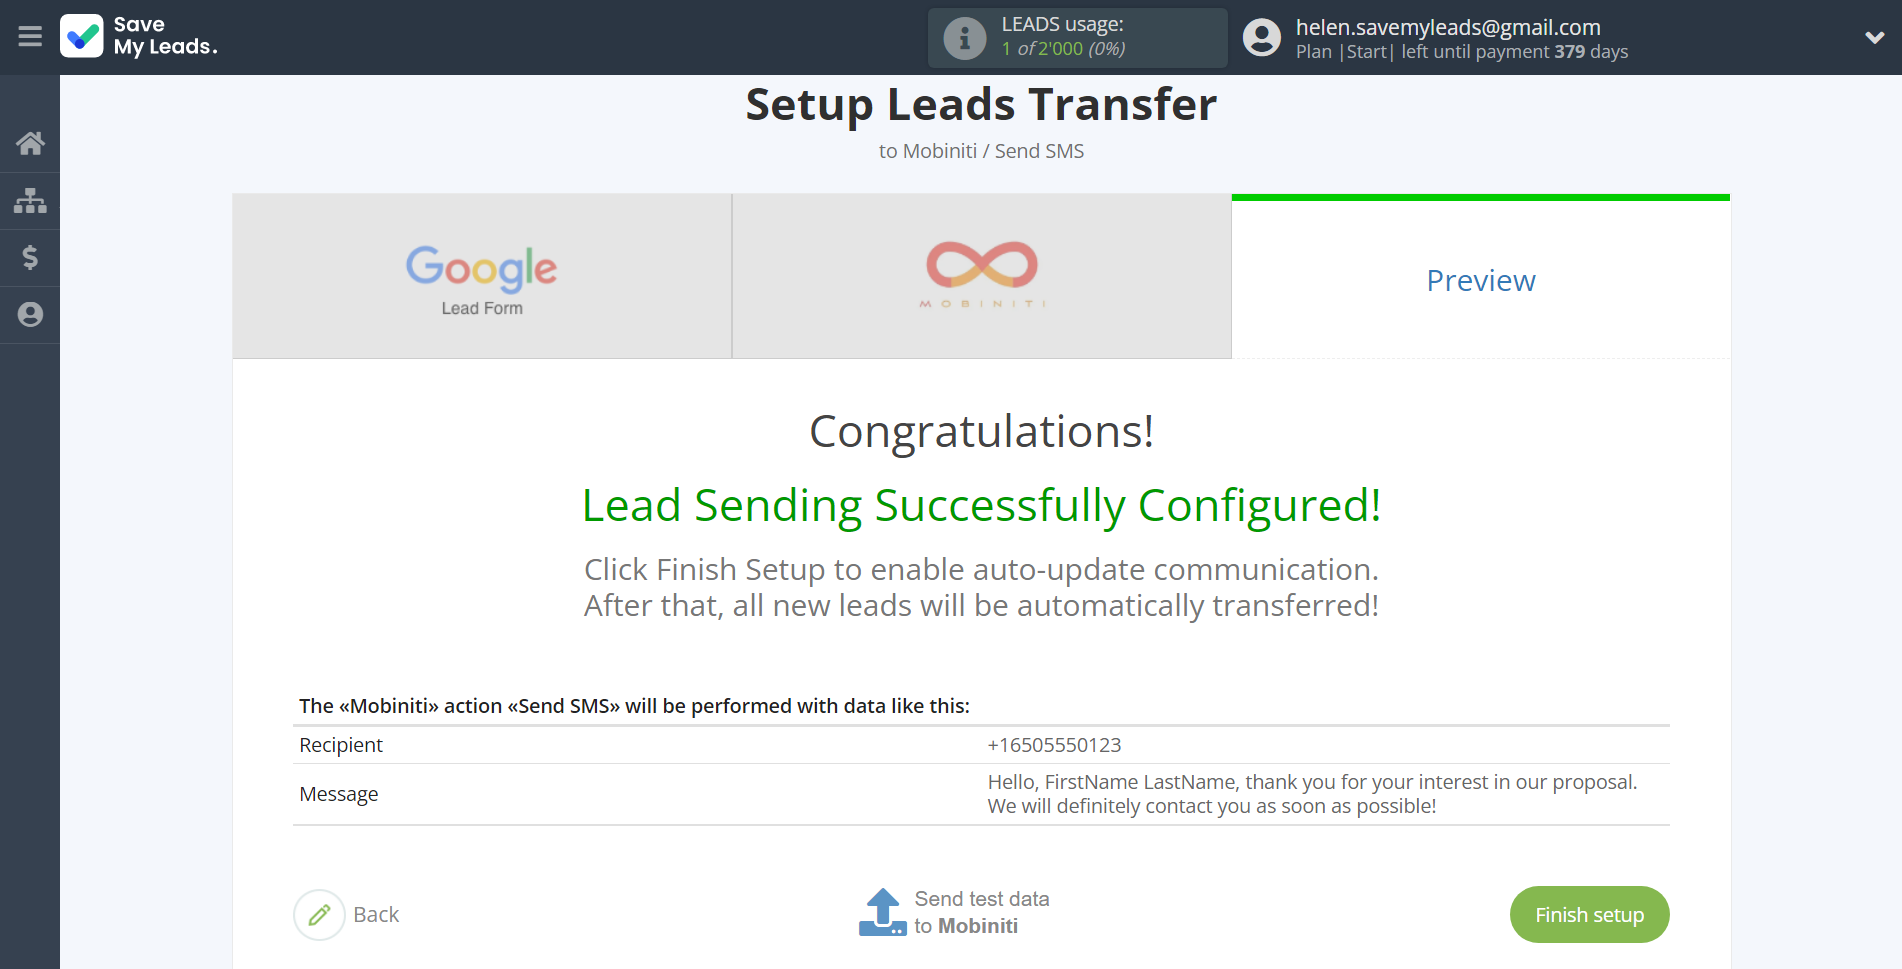 How to Connect Google Lead Form with Mobiniti | Test data